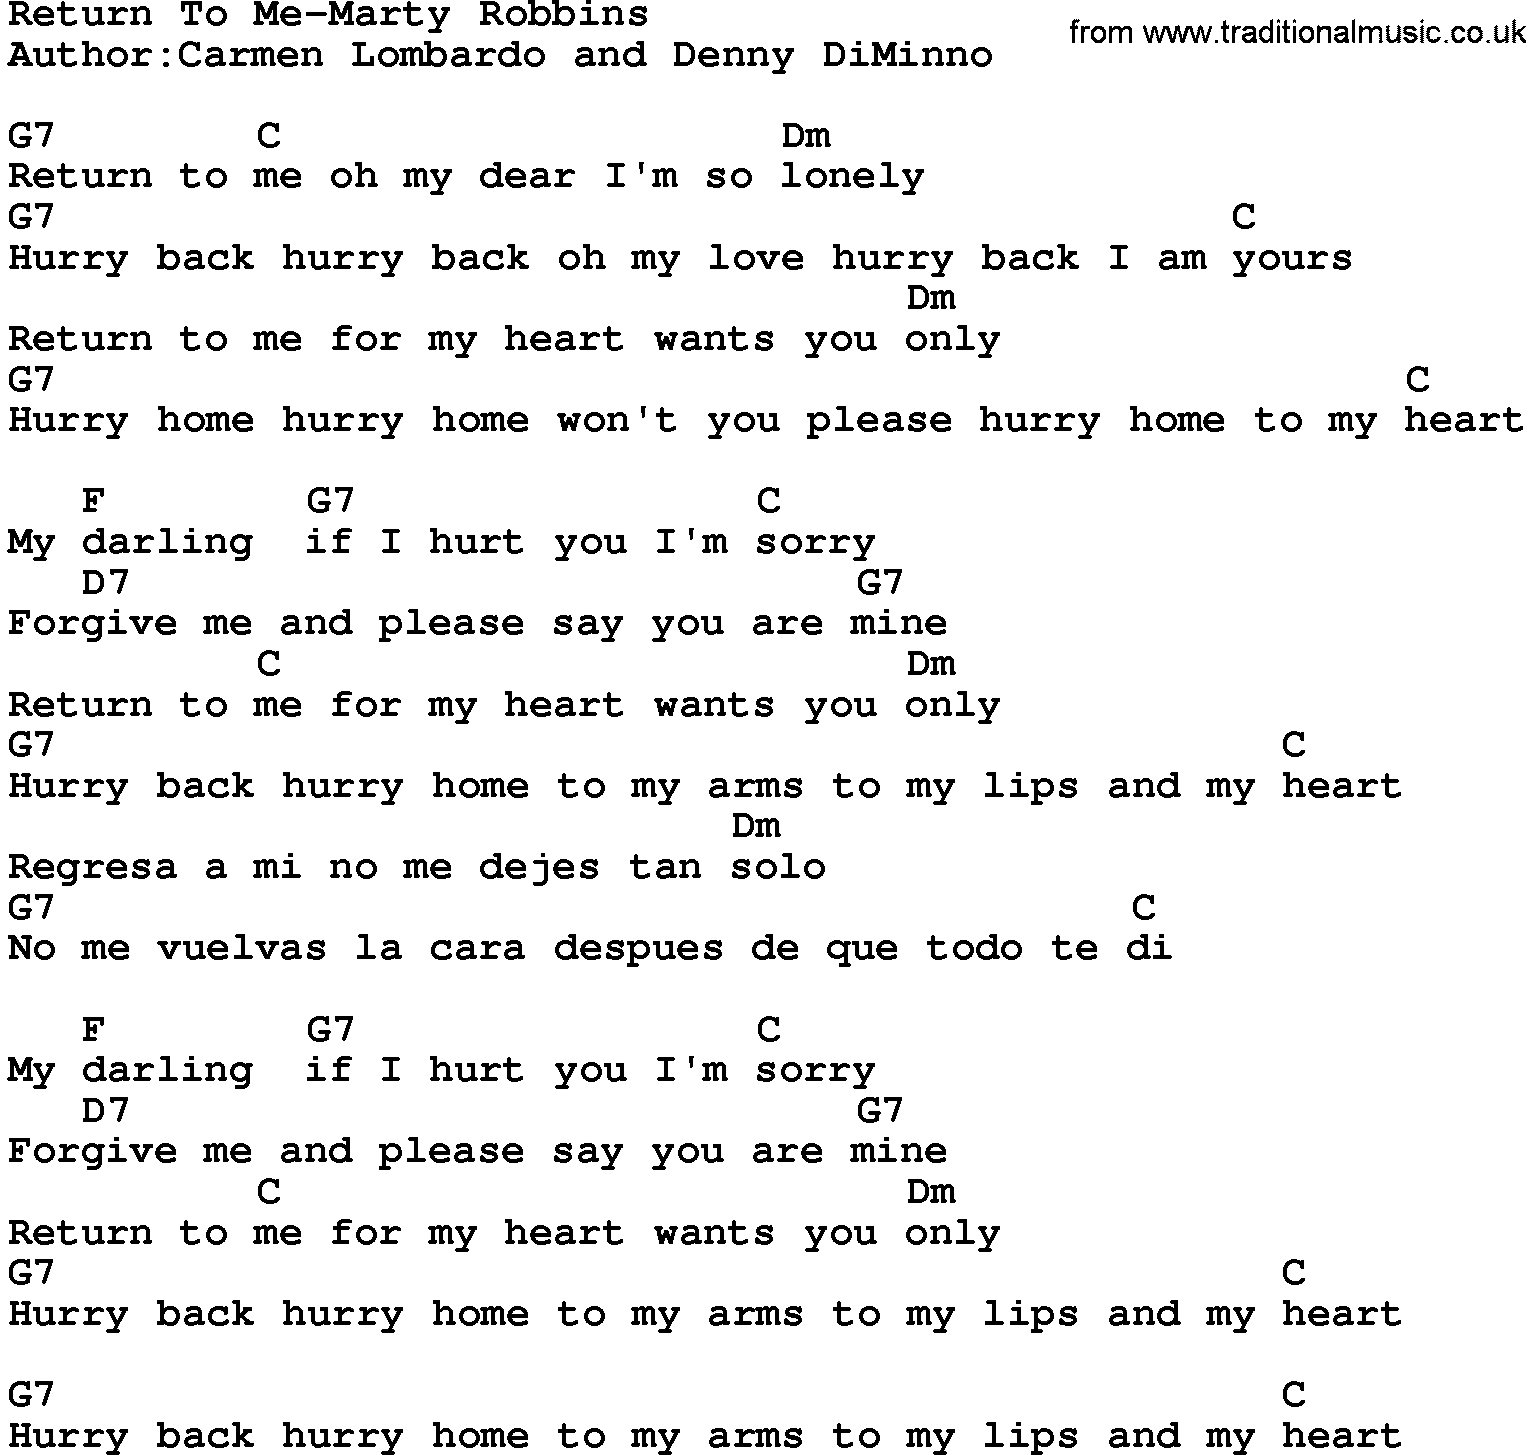 Country music song: Return To Me-Marty Robbins lyrics and chords